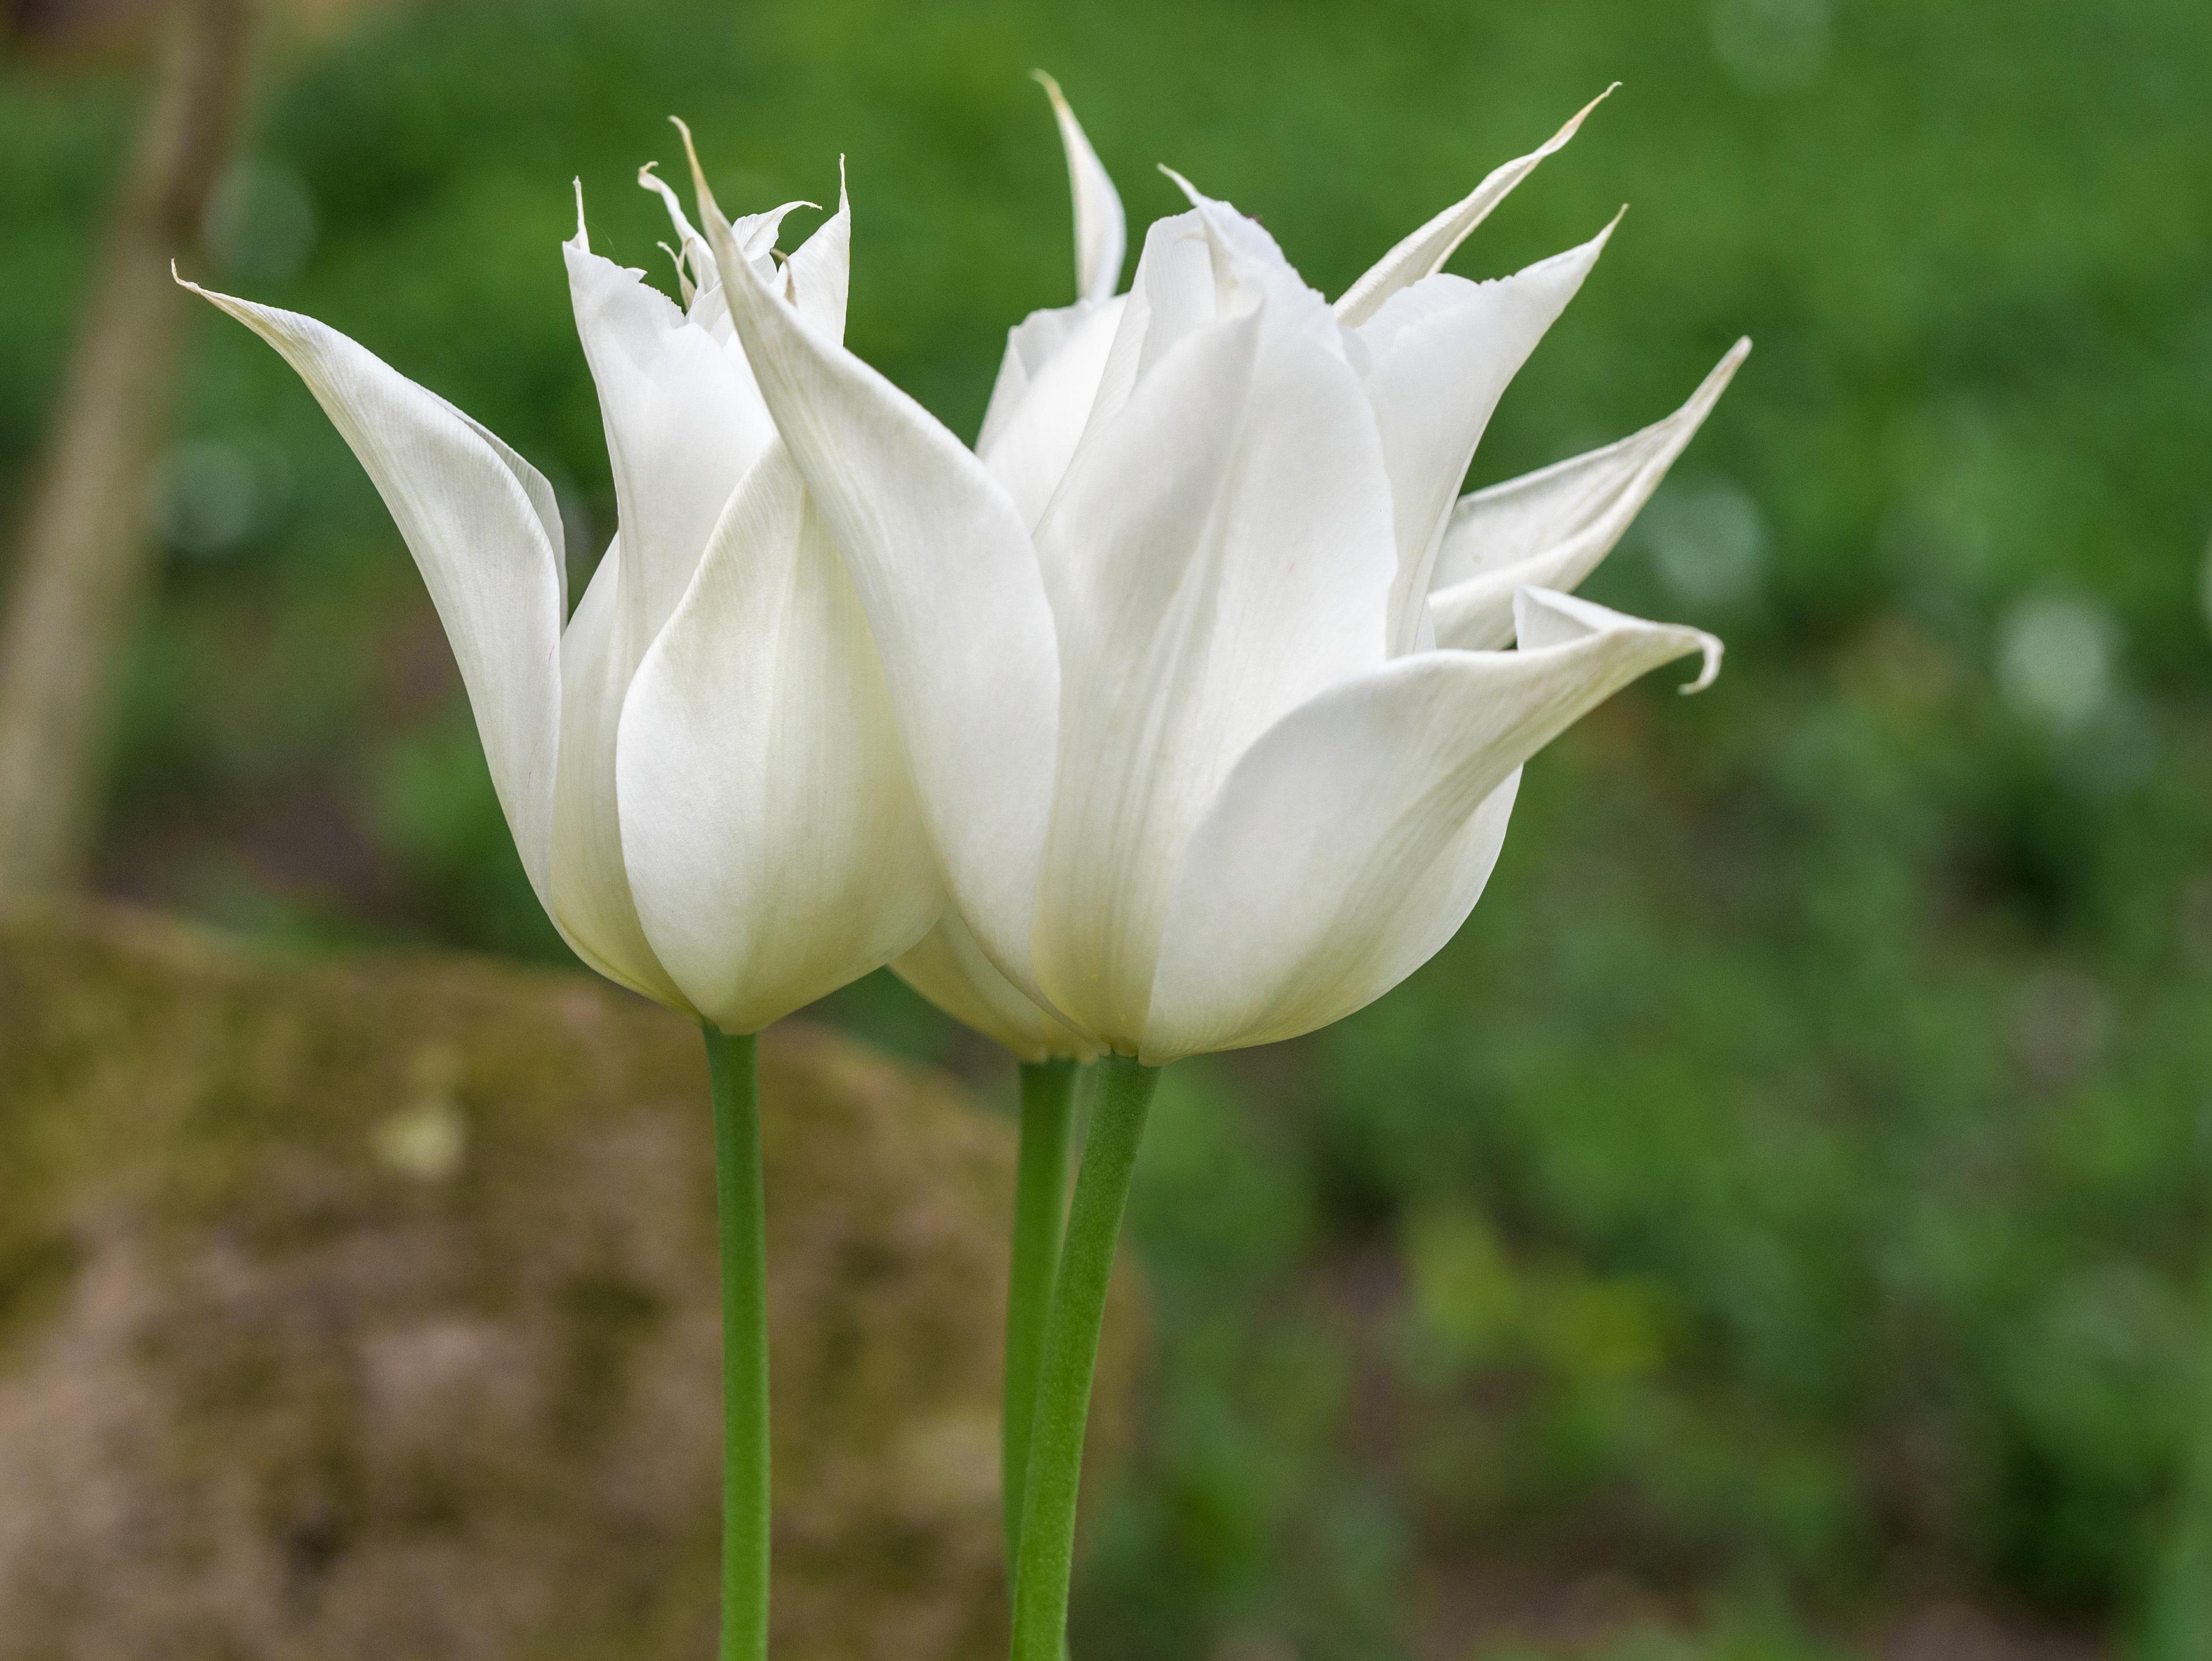 Tulip Lily Flowering 'White Triumphator' Tulip from Leo Berbee Bulb Company